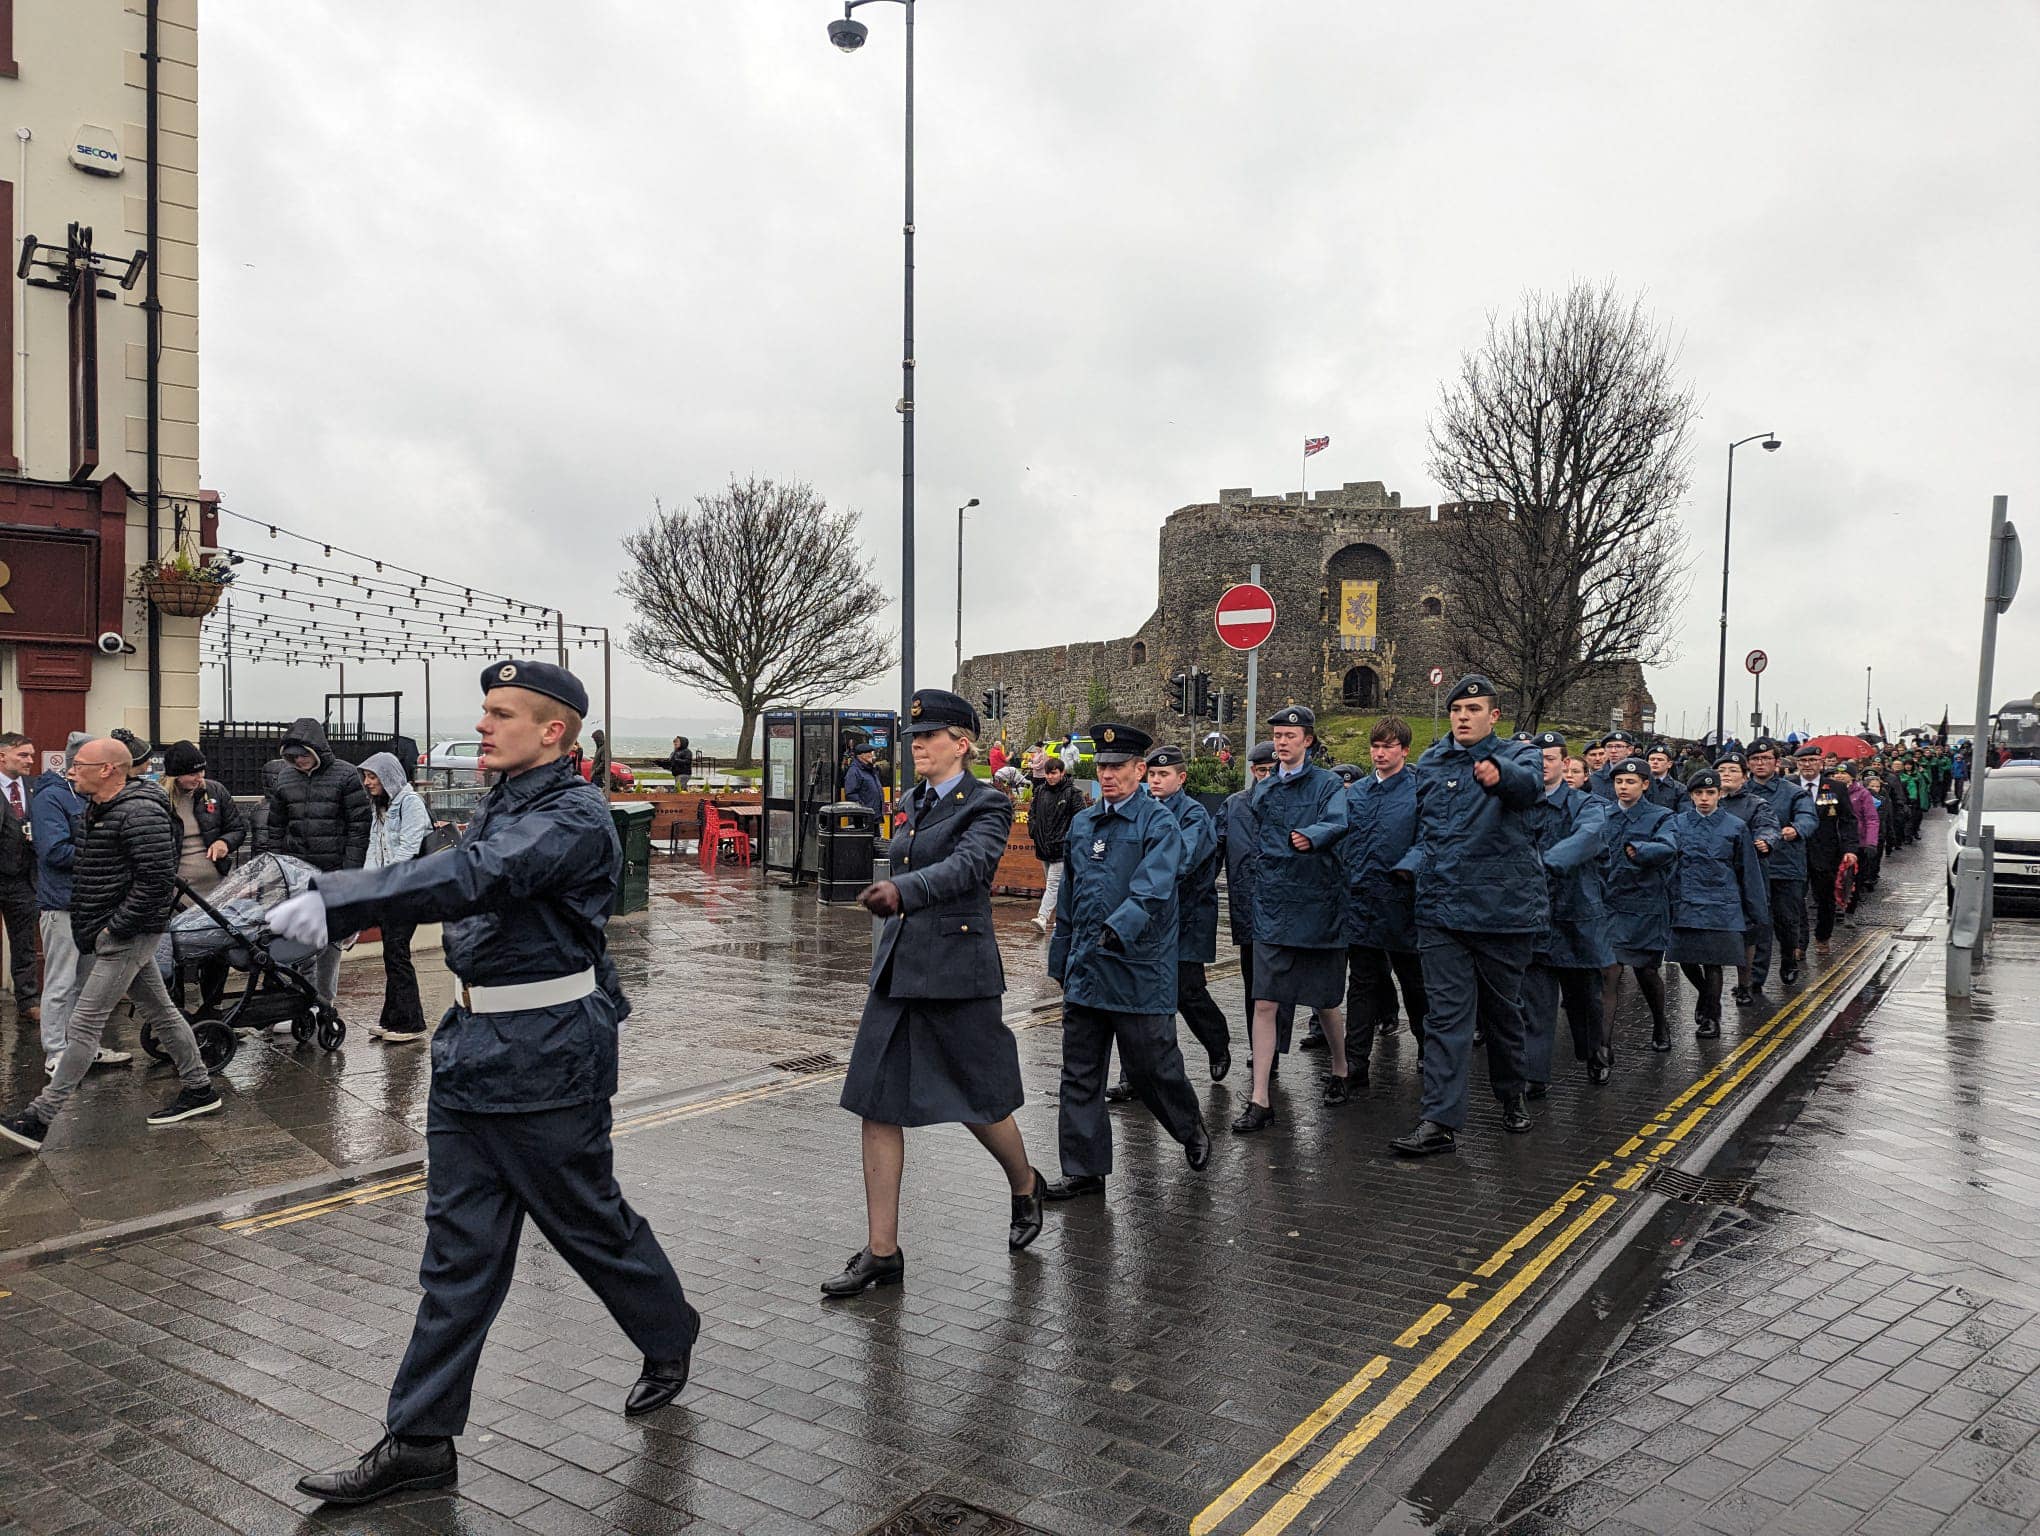 RAF Cadets in Northern Ireland marching through the wet streets